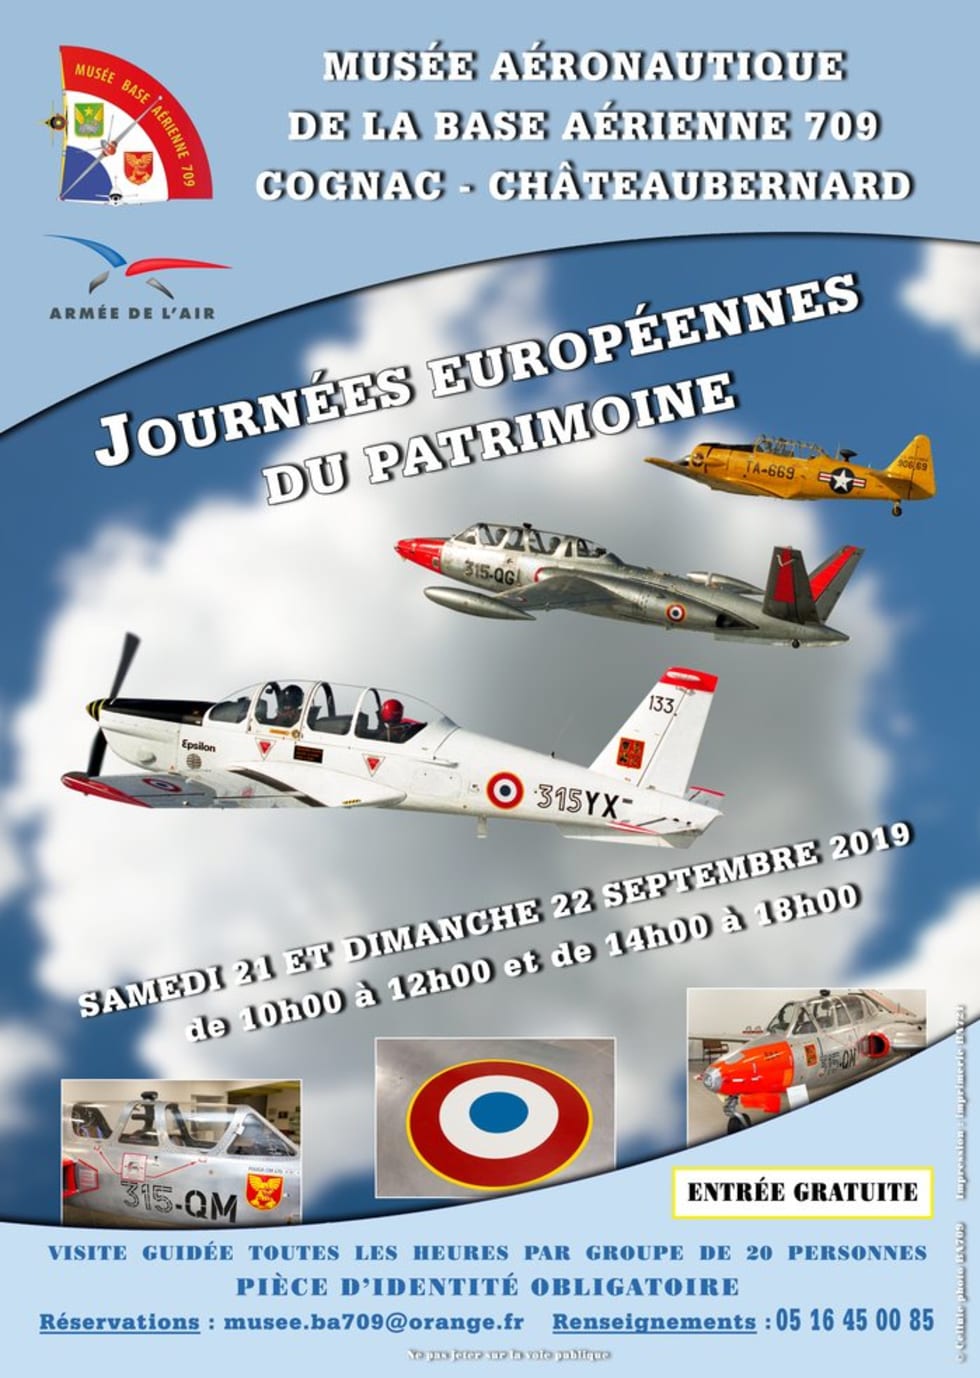 Poster of Guided tour of the Aeronautics Museum at the 709 Cognac-Châteaubernard Air Base